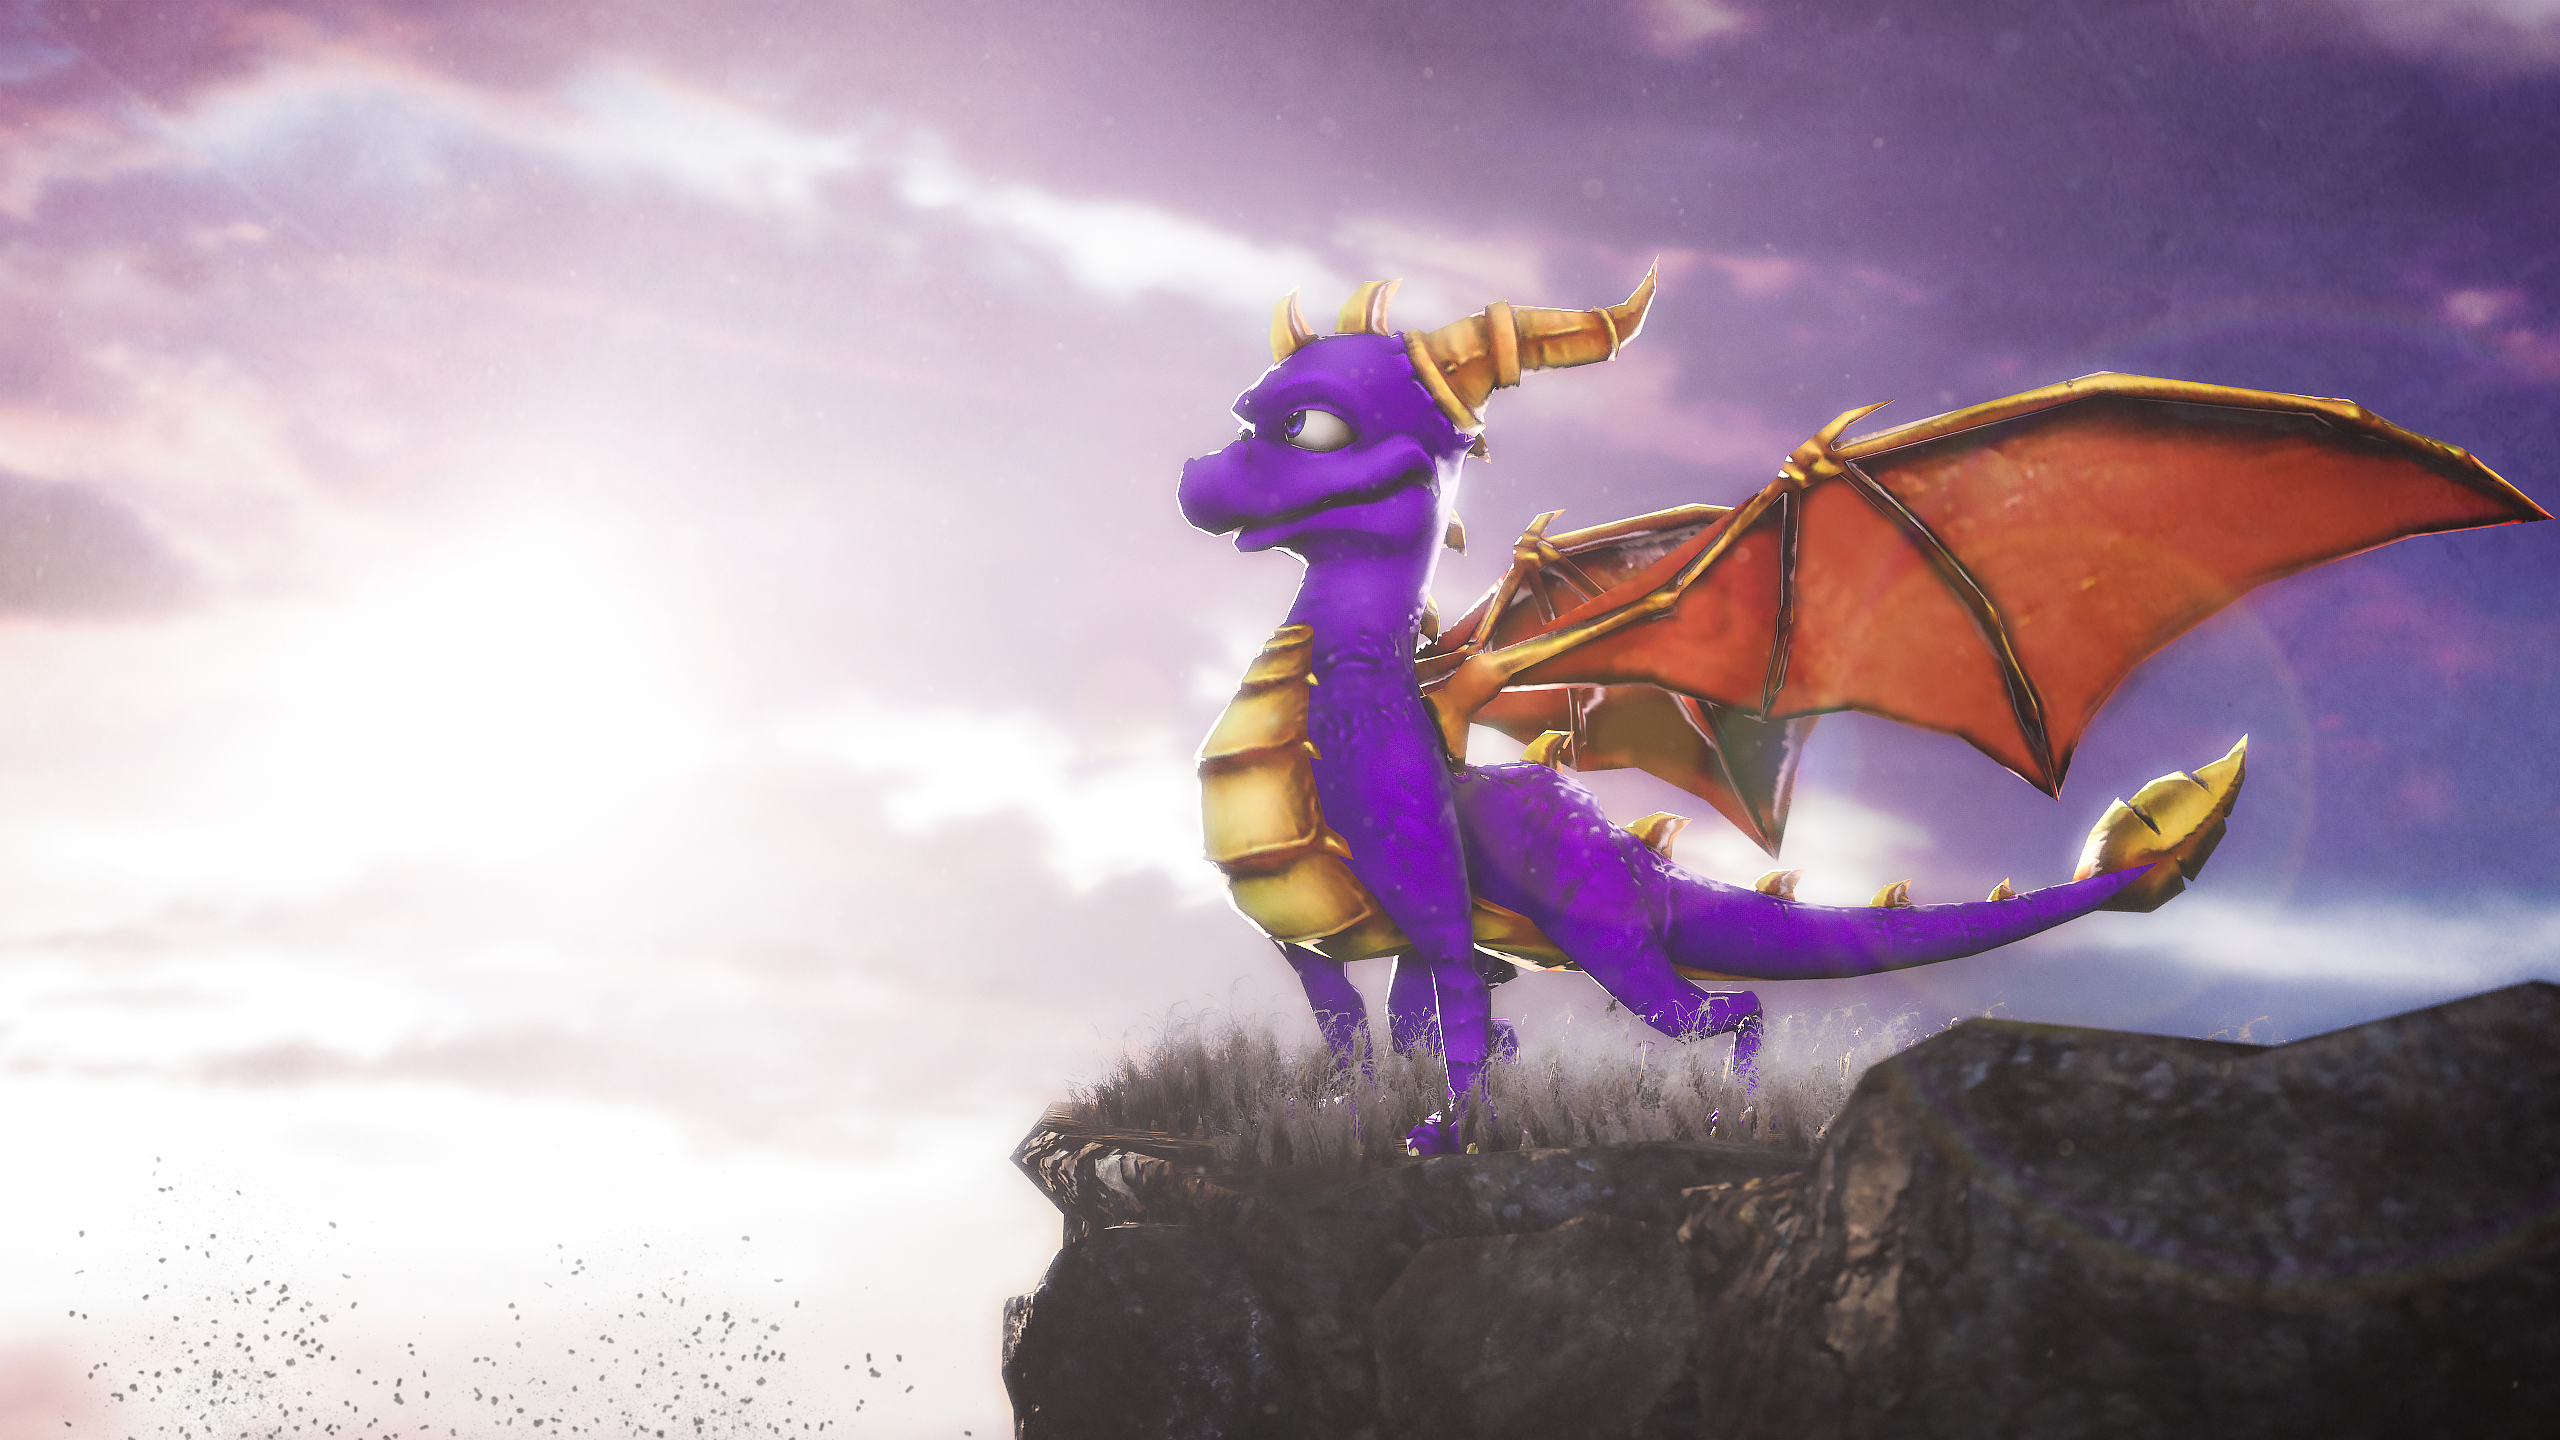 The Legend of Spyro: Dawn of the Dragon Wallpapers